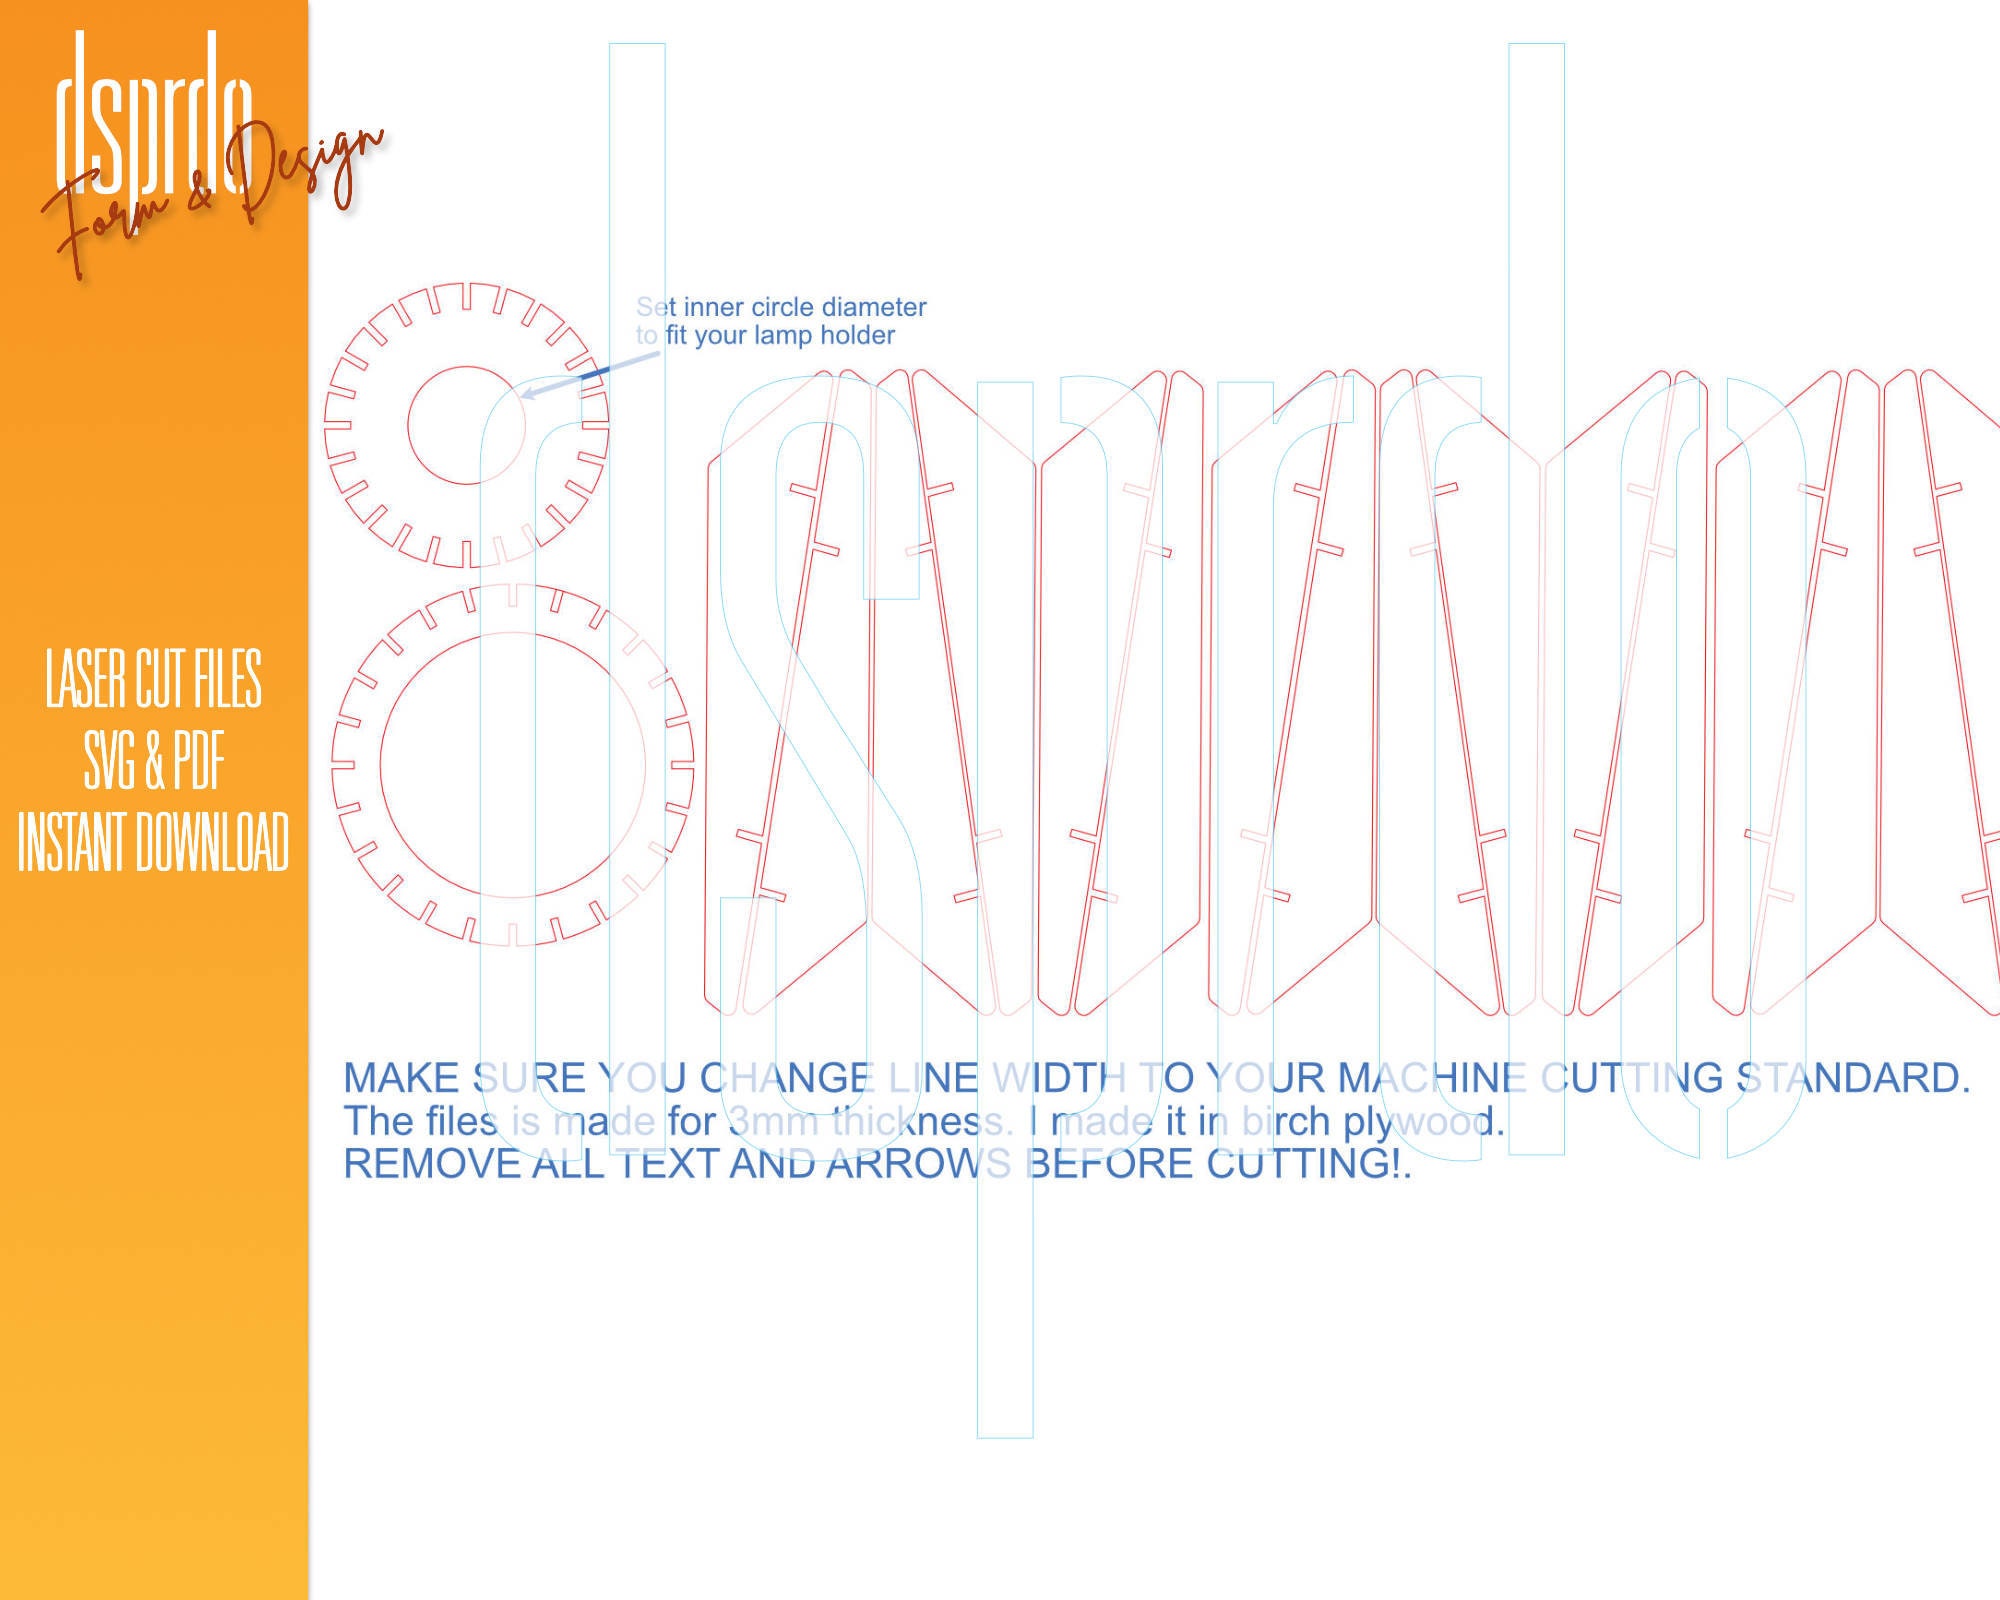 Cut file of Swedish design lamp - Instant Download for laser cutting.